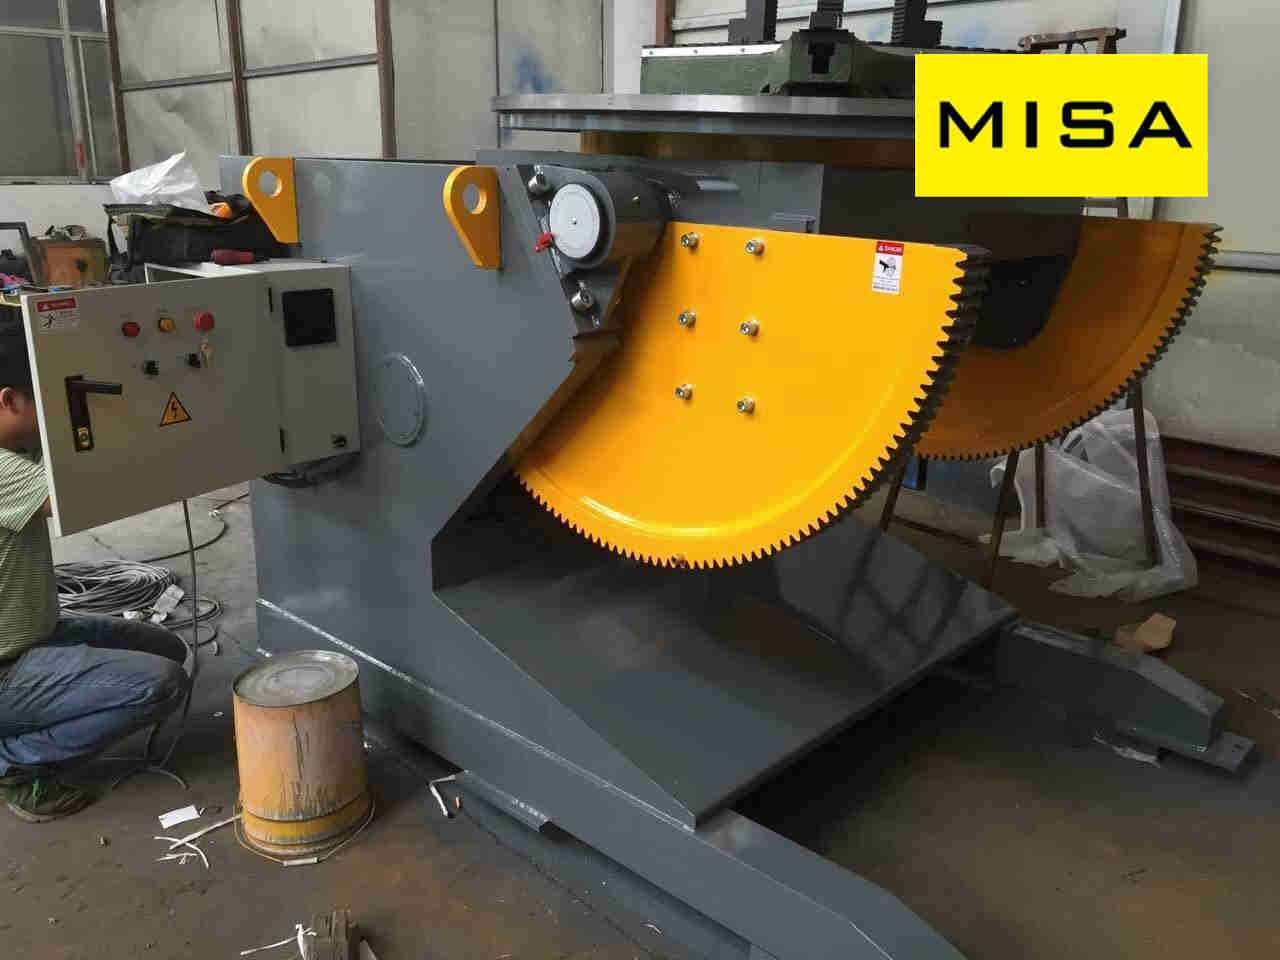 HBJ-30 Yellow Fixed Welding Positioner With Horizontal Turning Table And 5 JAWS Chuck